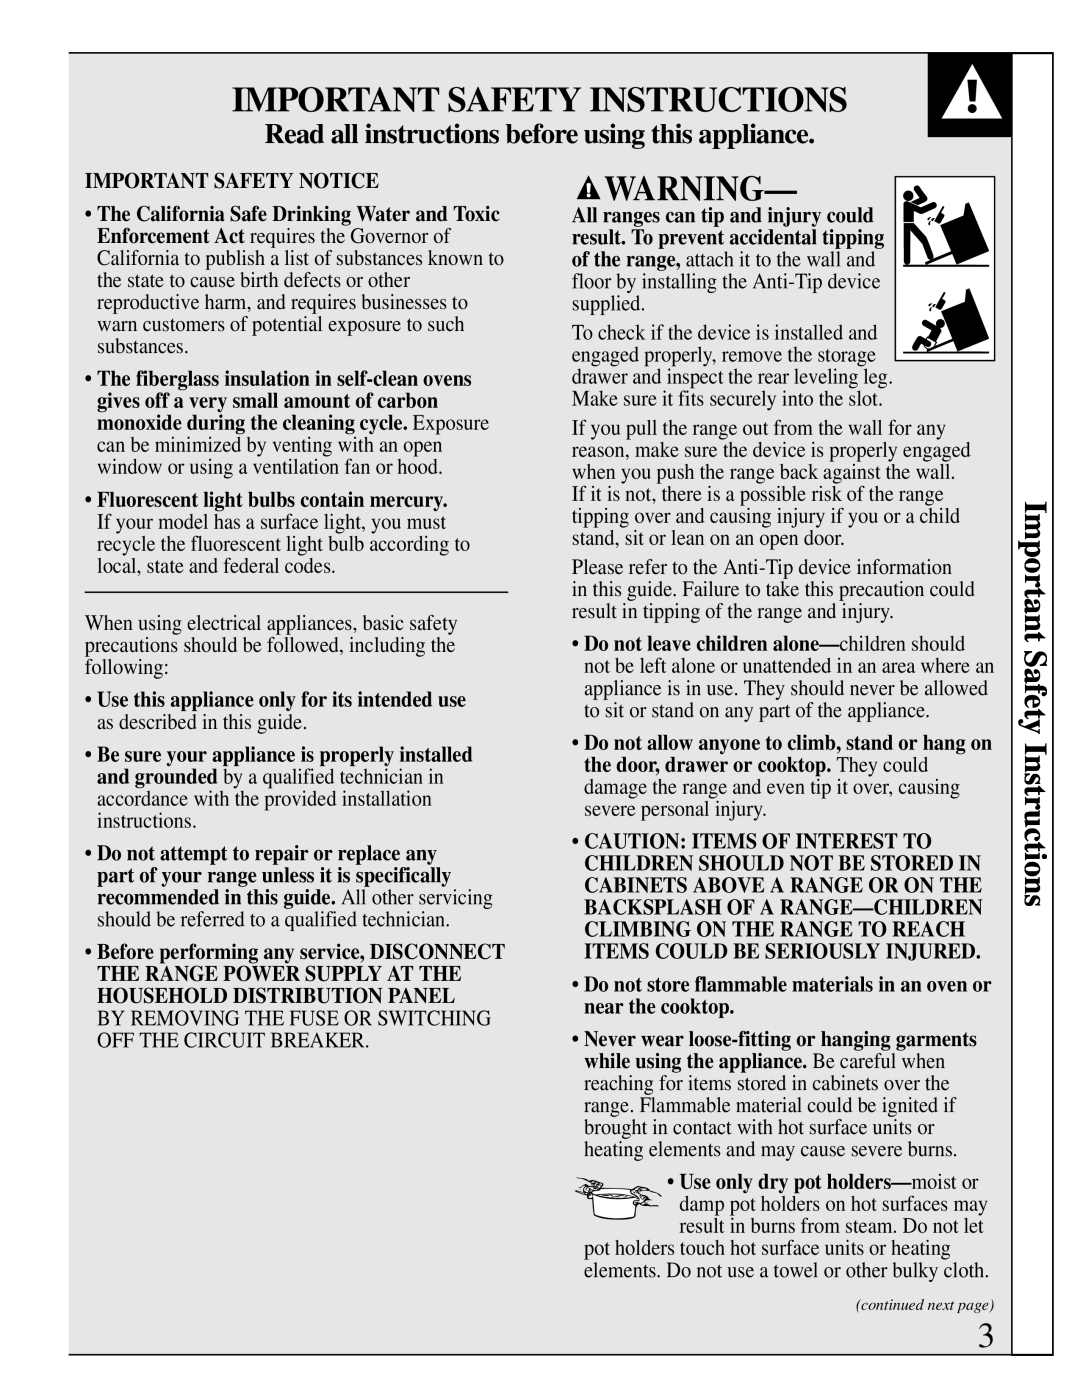 GE 10-95 CG warranty Important Safety Instructions, Read all instructions before using this appliance 